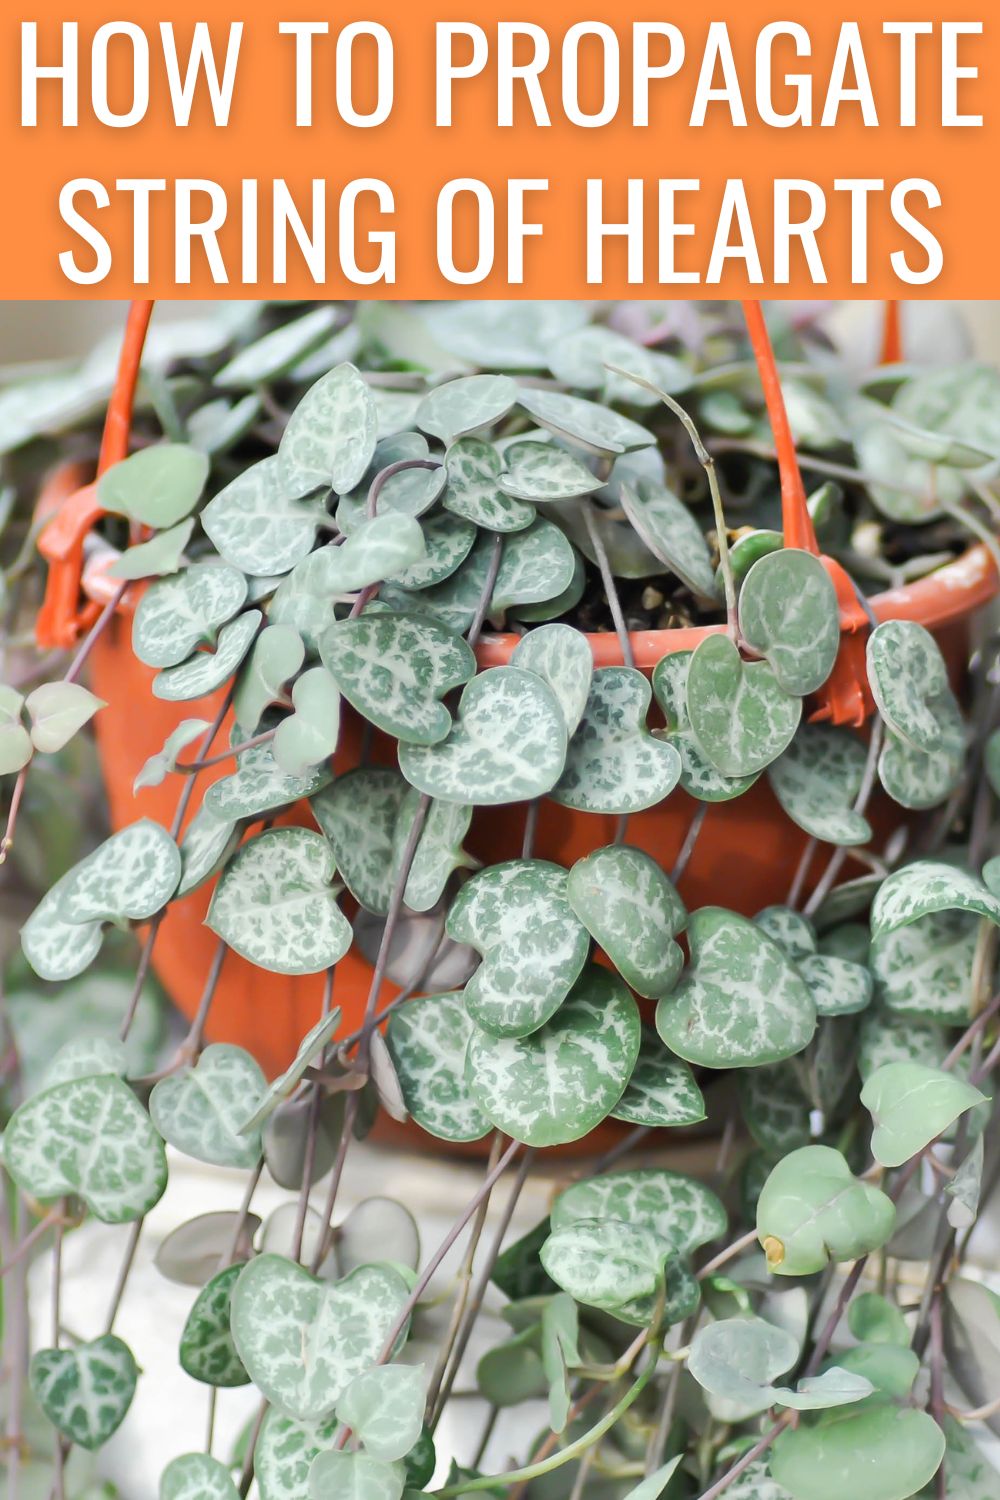 How to propagate string of hearts.